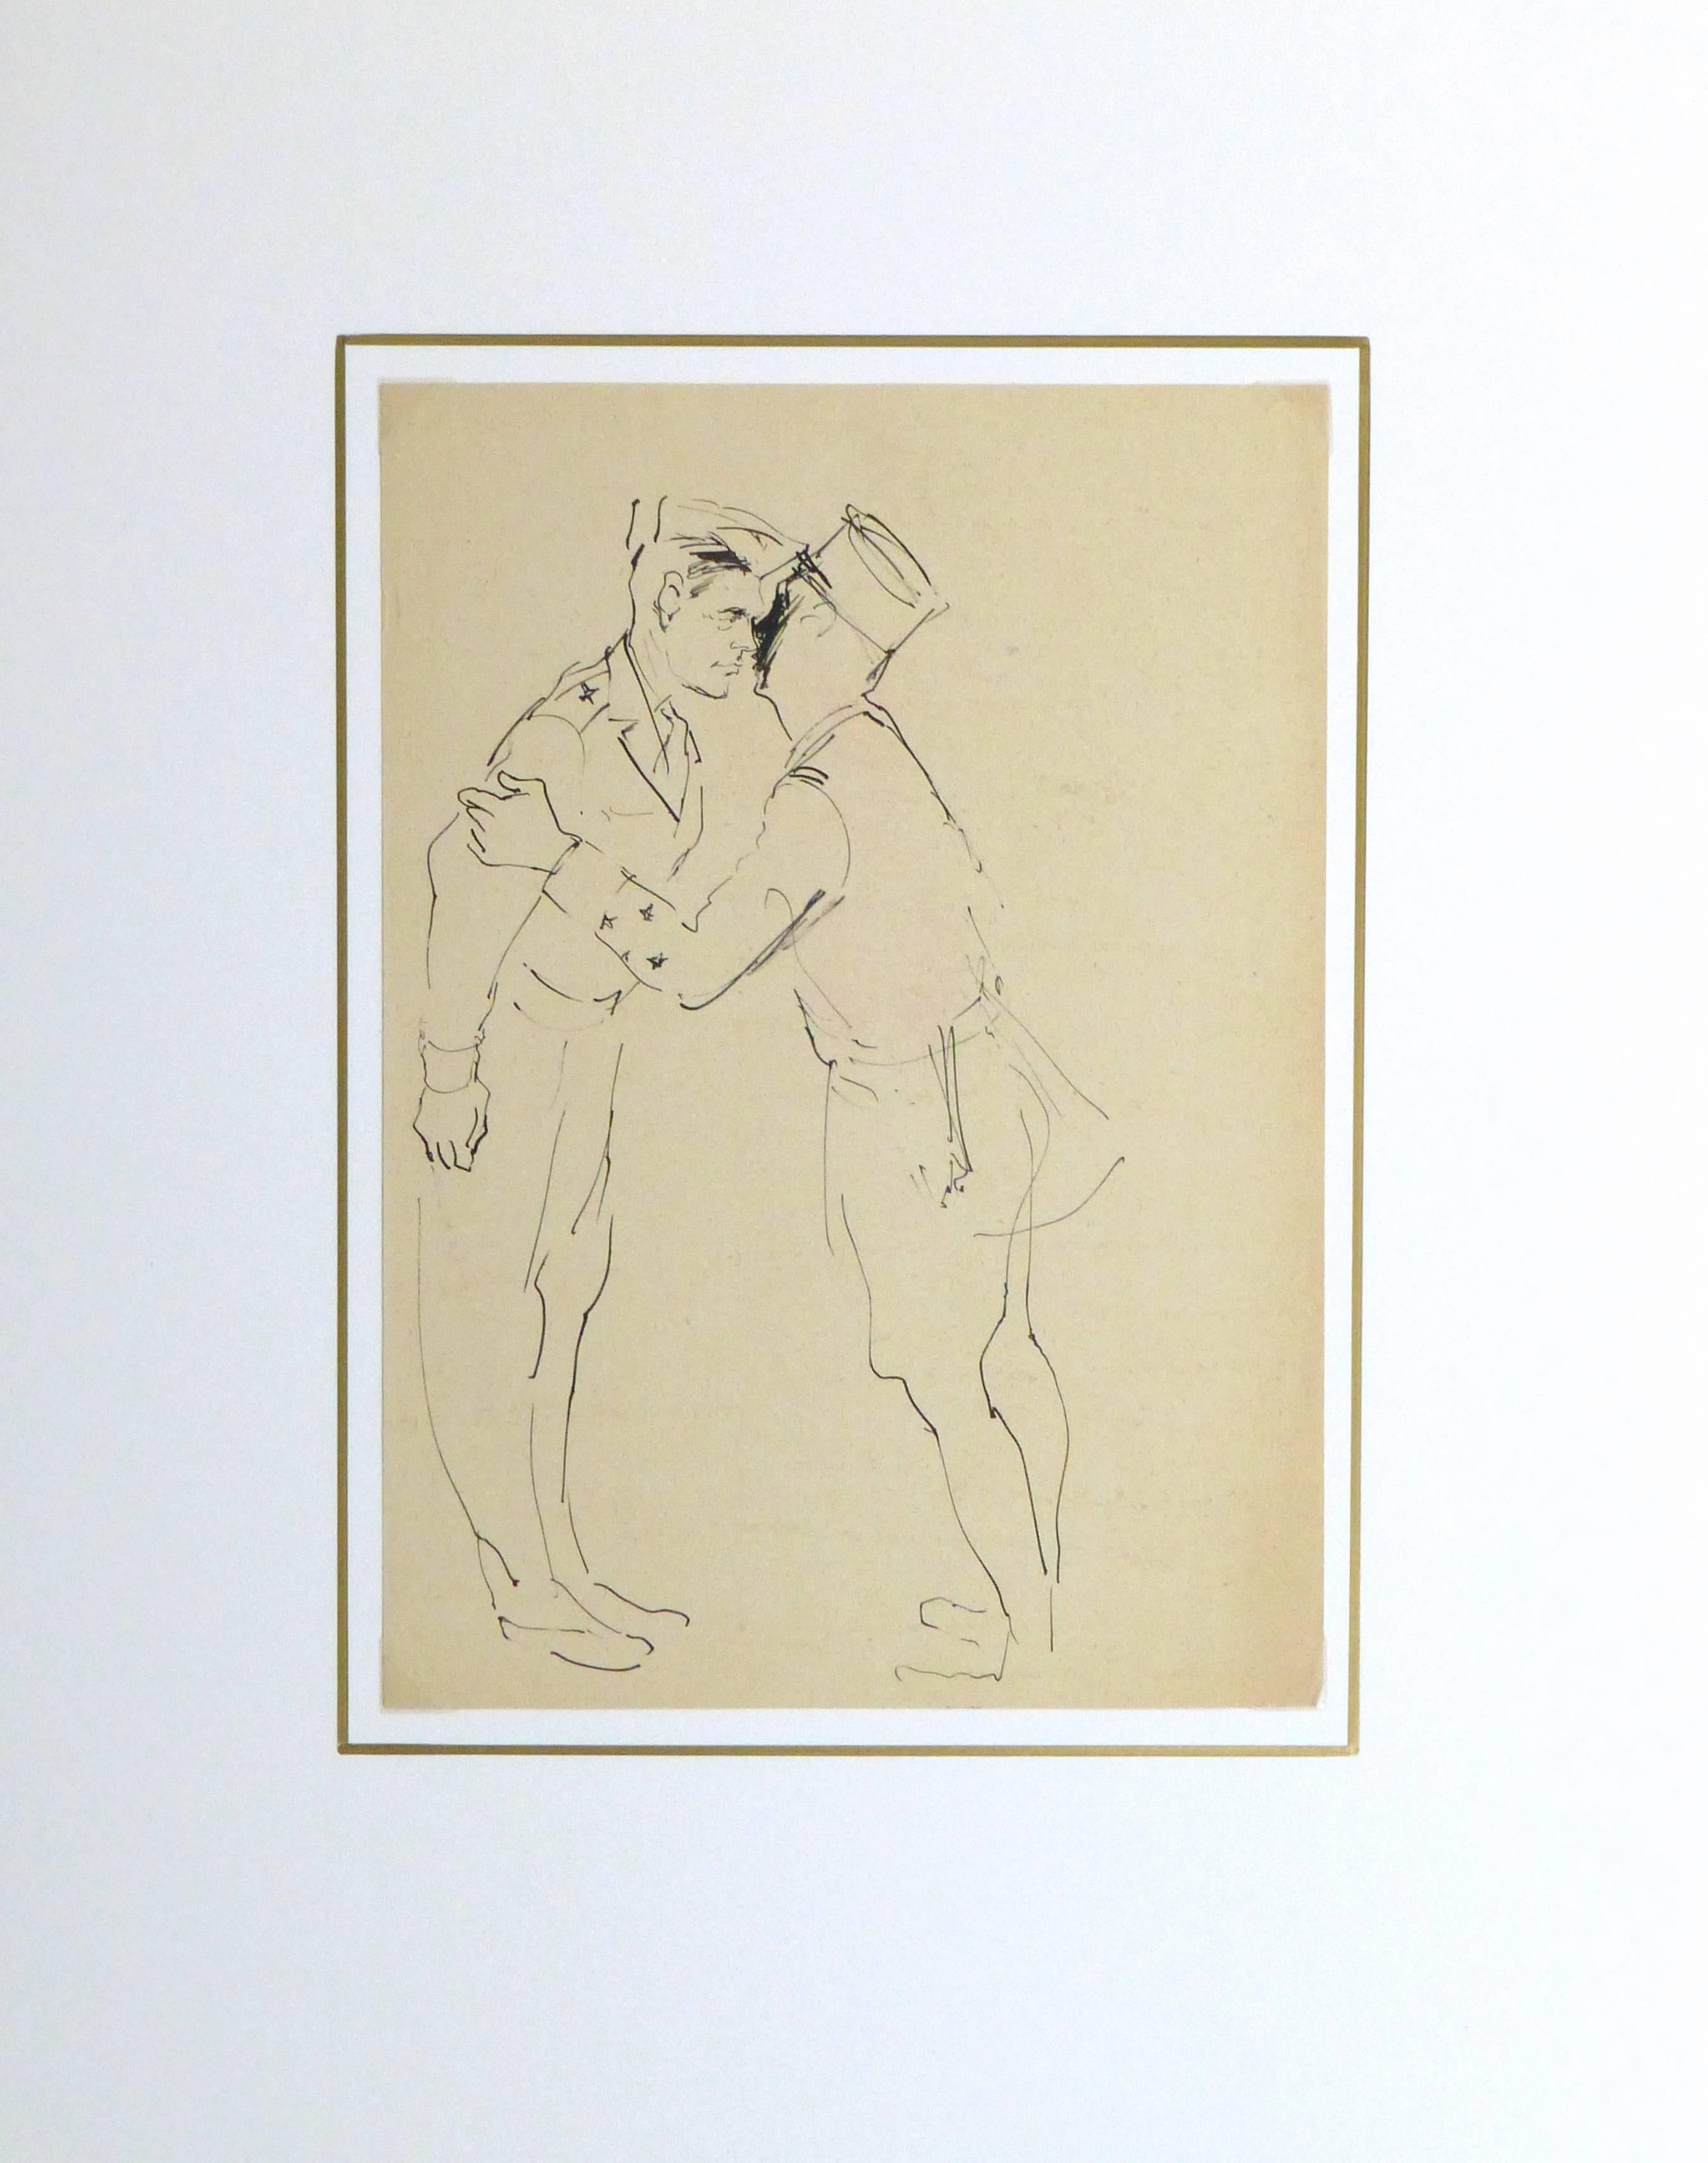 Vintage French Pen & Ink Sketch - The General's Salutation - Beige Figurative Art by Pierre Pages